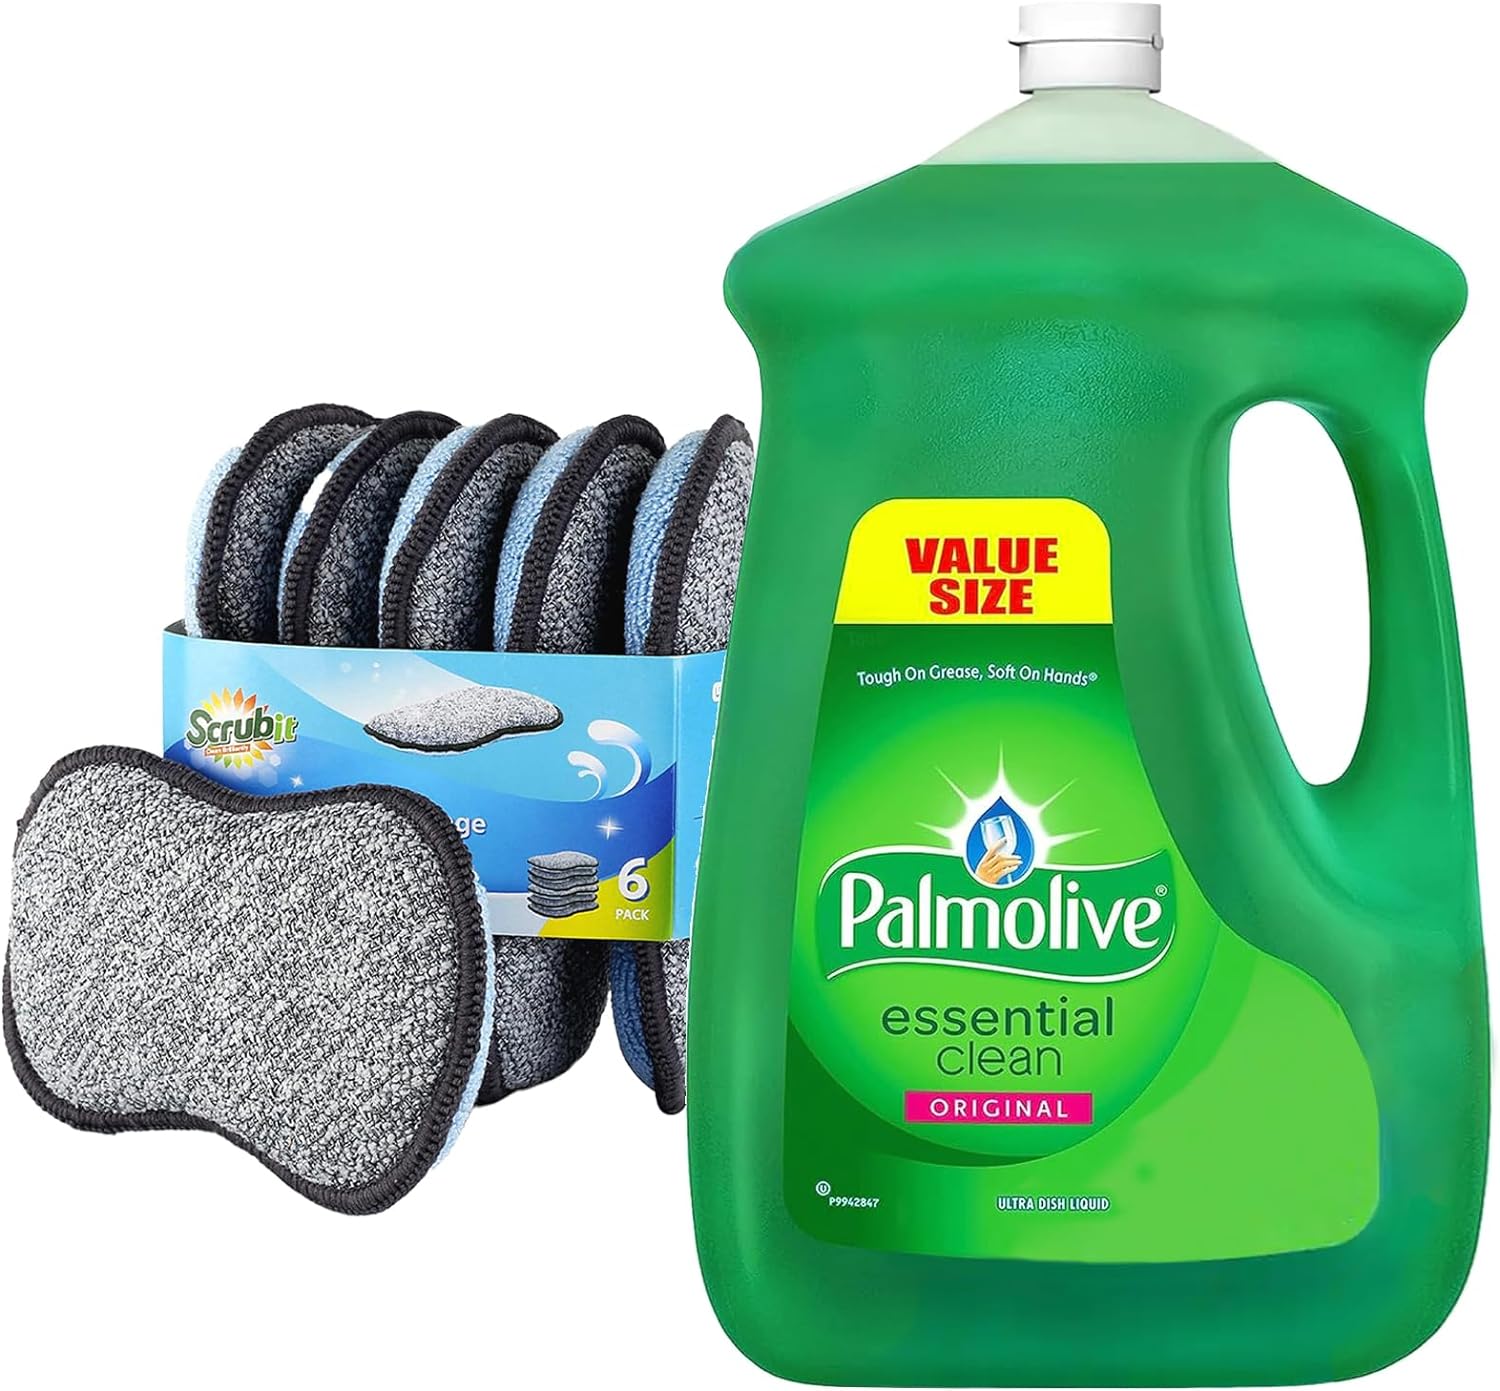 Palmolive Dishwashing Liquid - 90 oz. Palmolive Dish Soap Liquid - With 6 Multi-Purpose Scrub Sponges for Cleaning Dishes, Pots and Pans